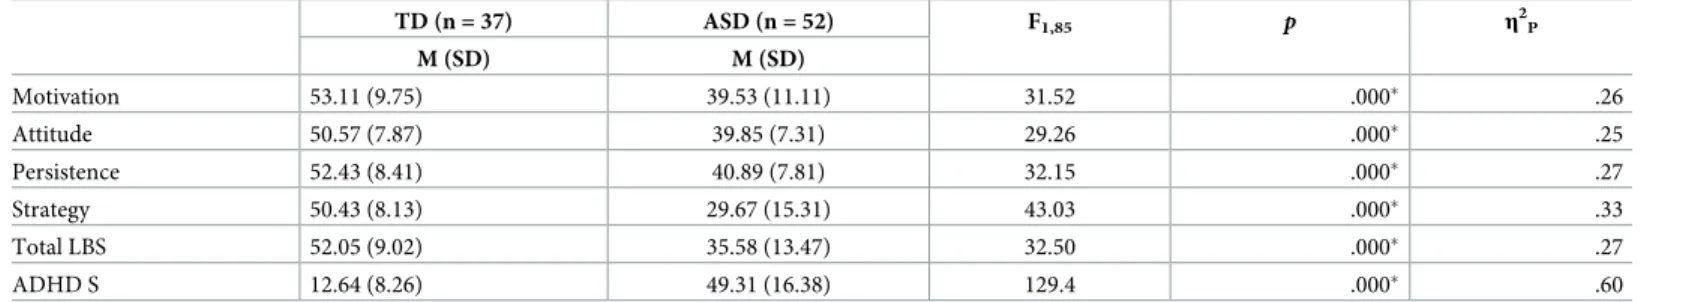 Table 2. Comparisons of learning behaviors and ADHD symptoms in ASD and TD groups.